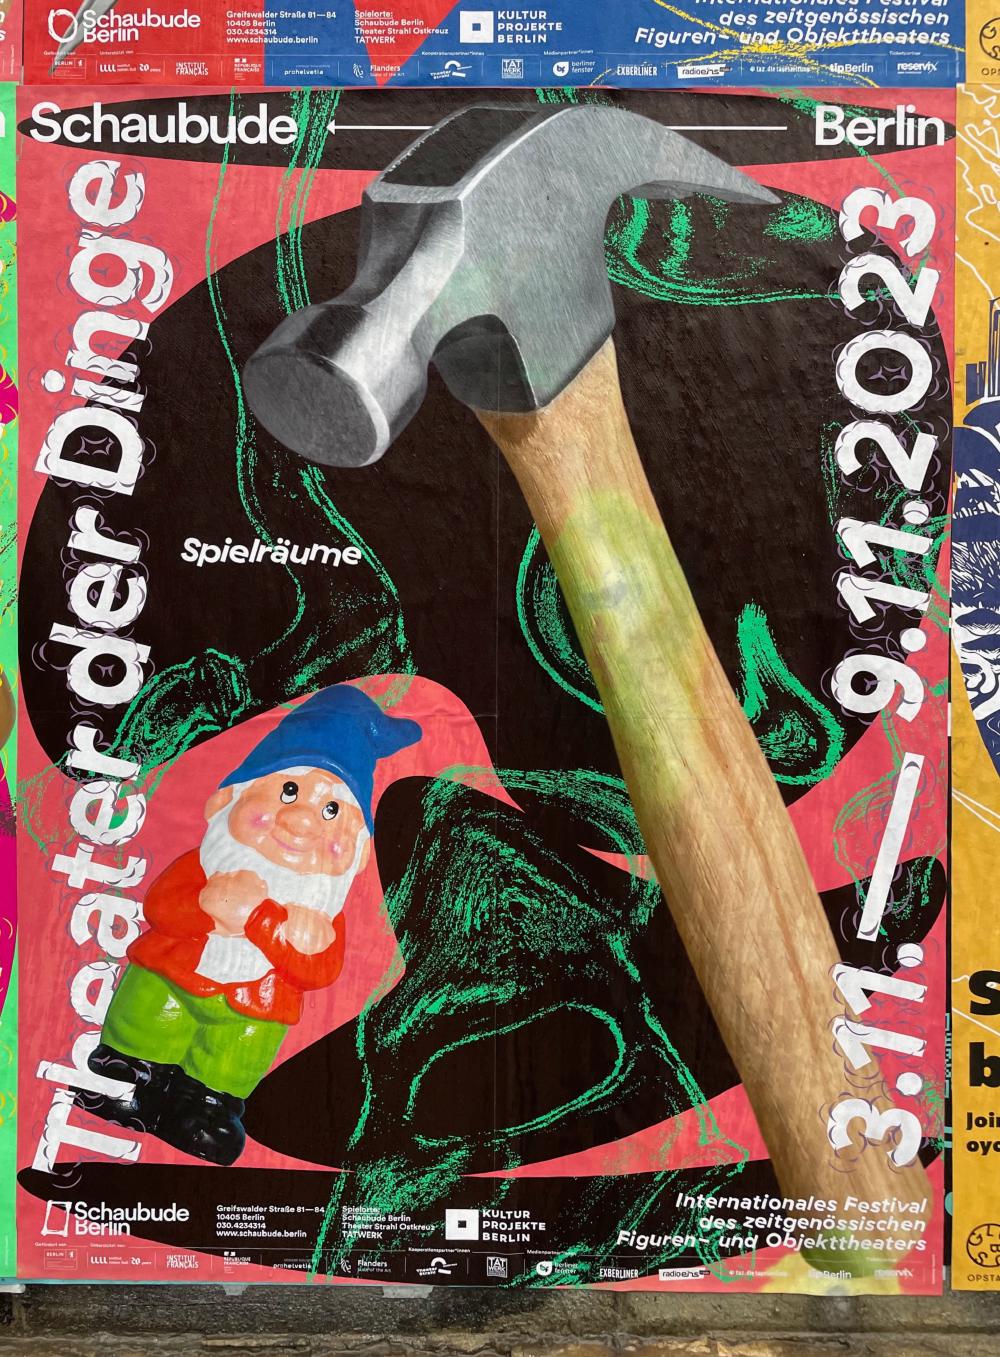 Hammer and garden gnome on a poster for the Theater of Things